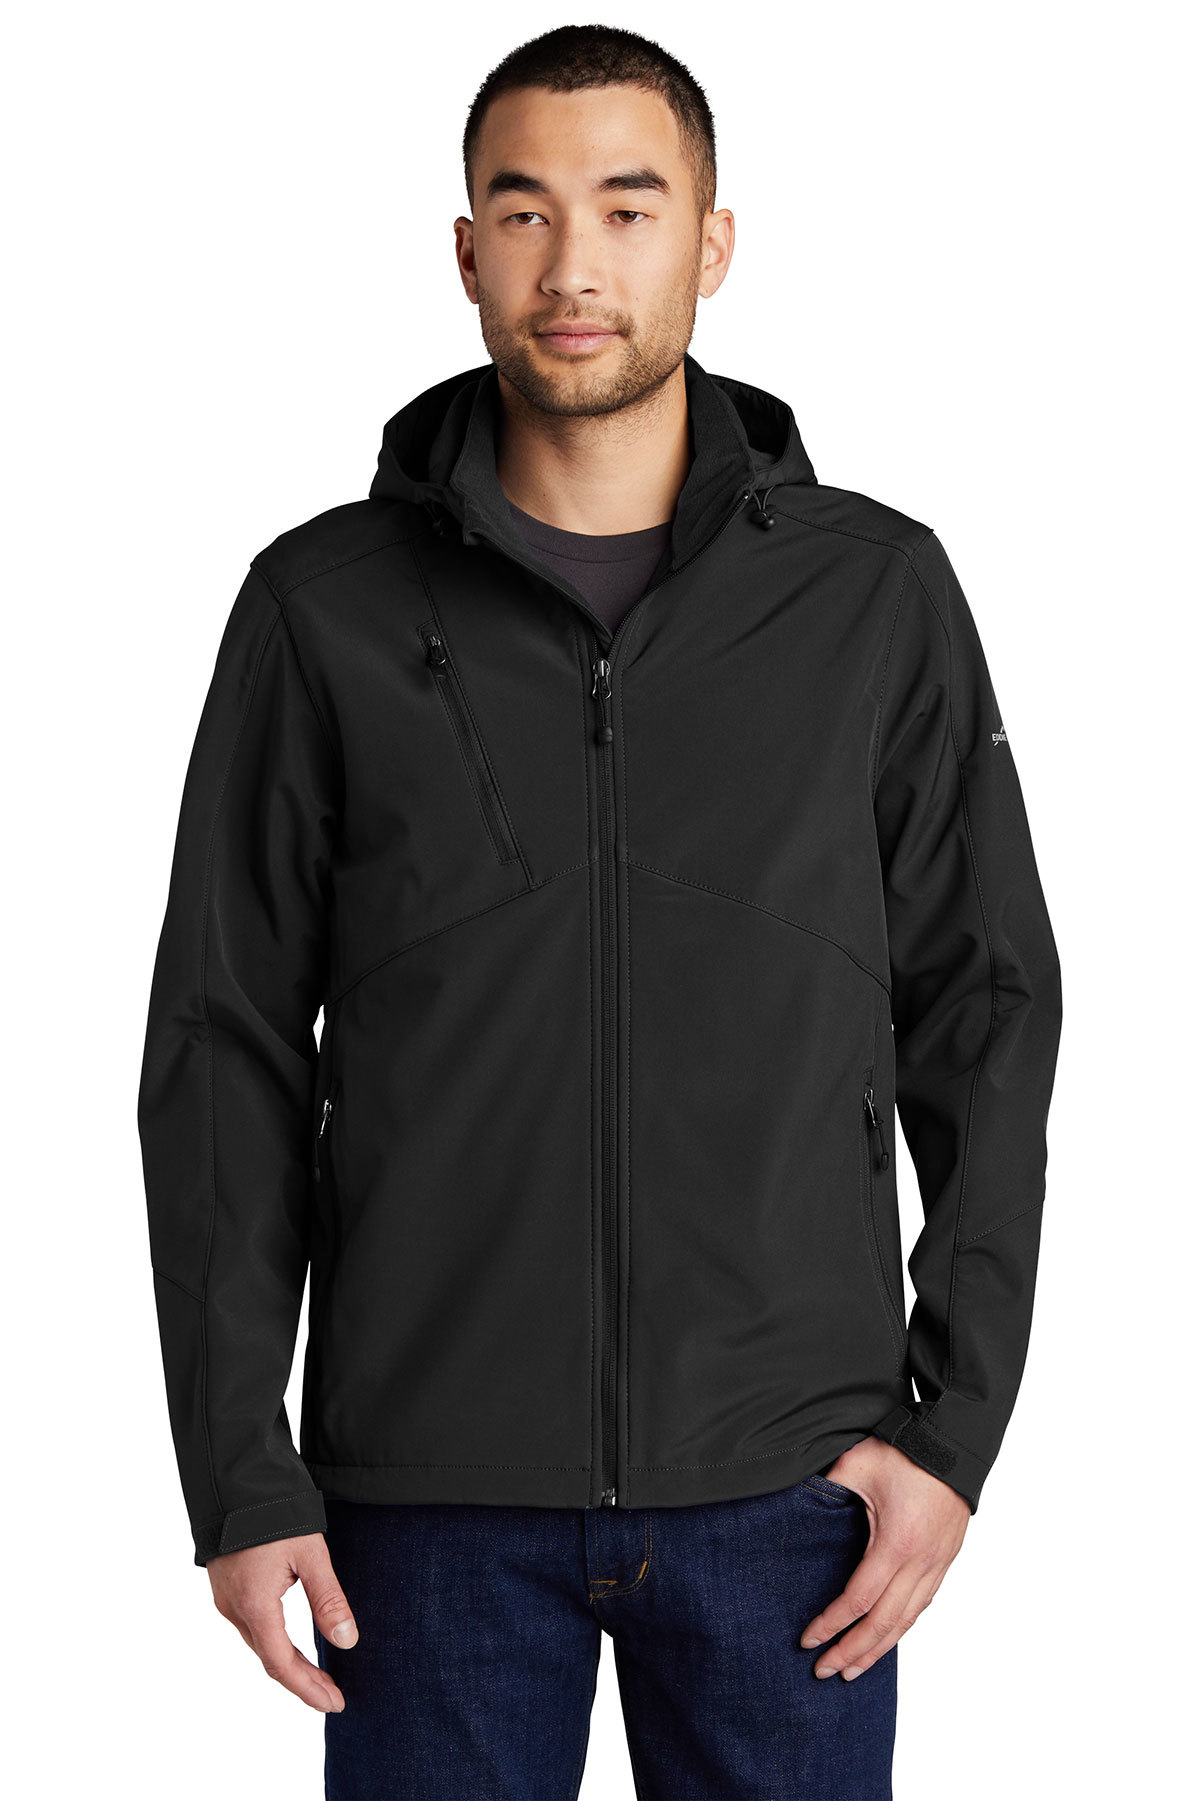 Best Soft Shell Jacket for men's  96/4 poly/spandex stretch woven